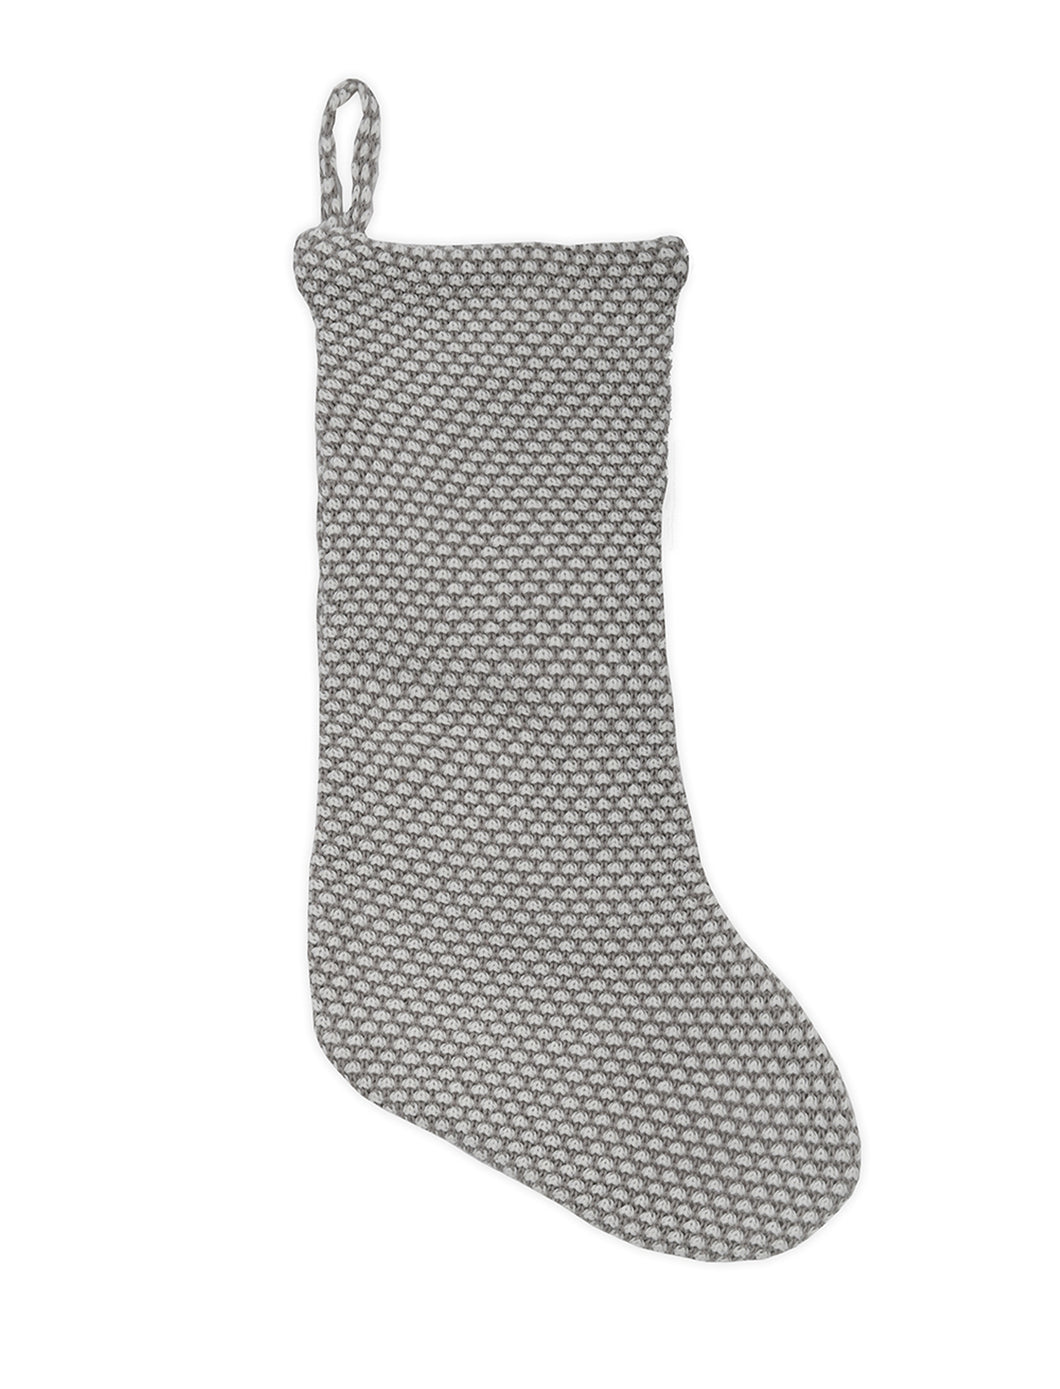 Grey &white knitted Christmas stocking